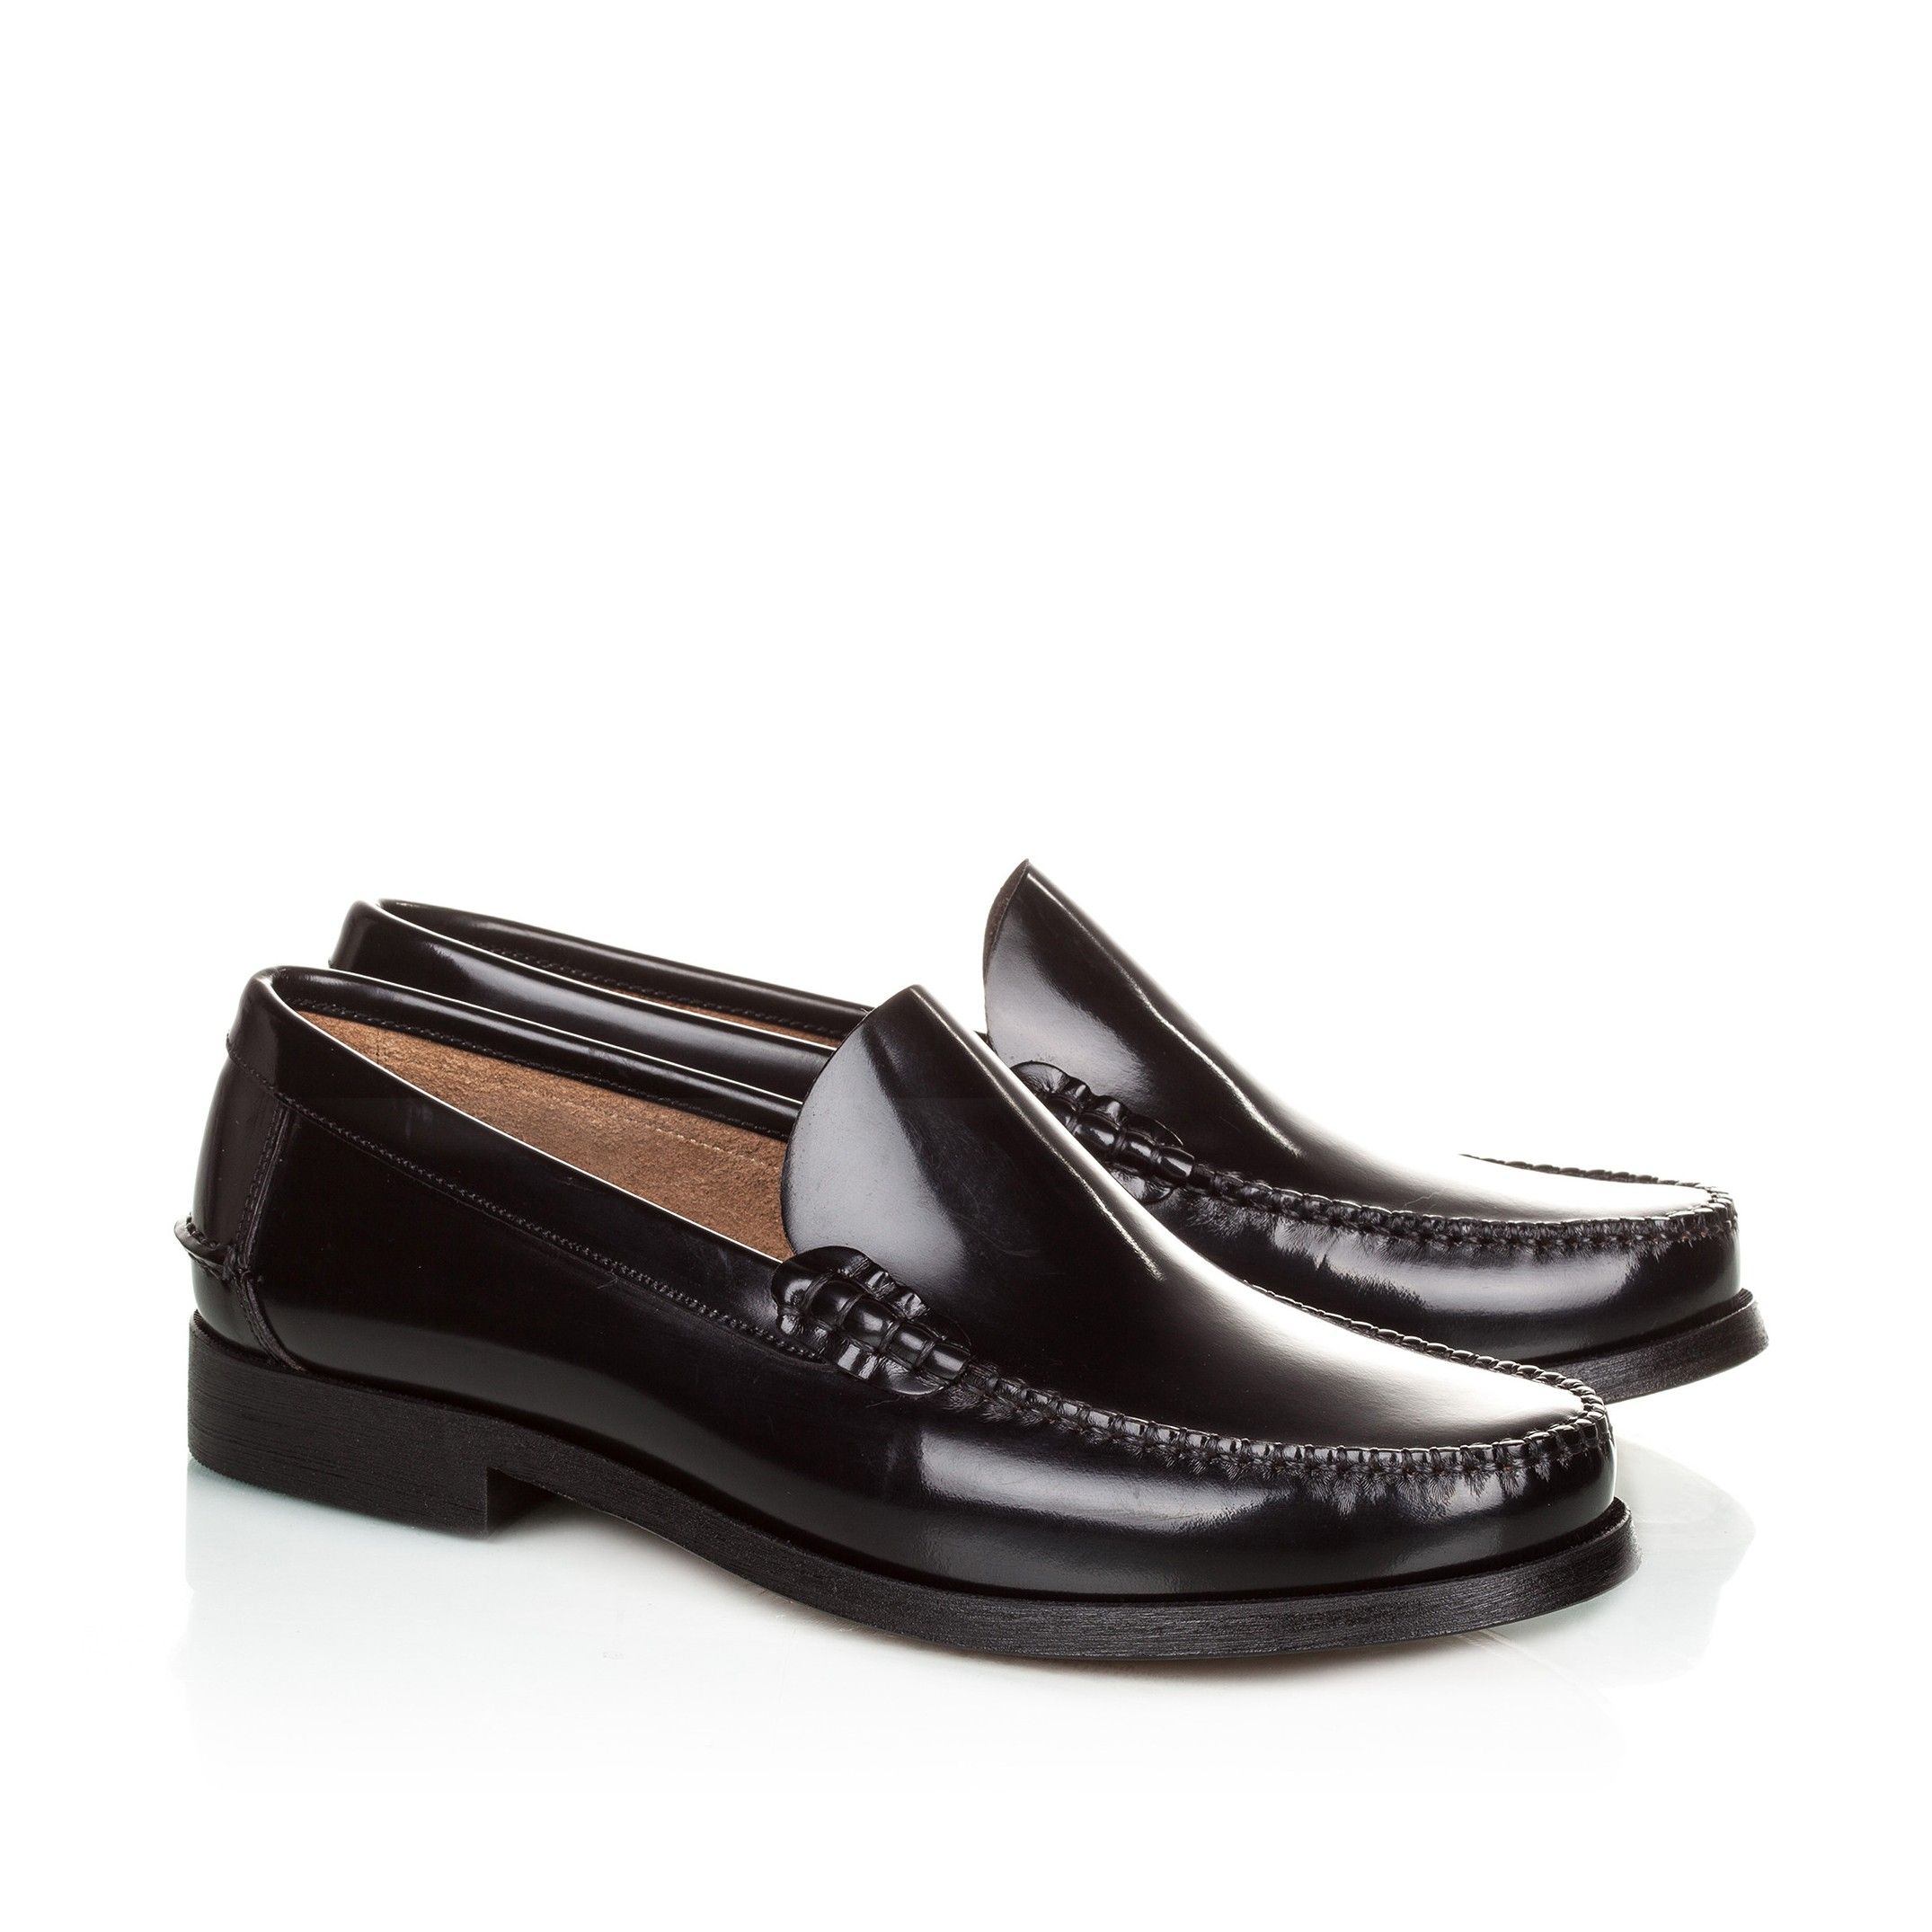 Castellanisimos Leather Moccasins Elegant and Comfortable Classic Shoes